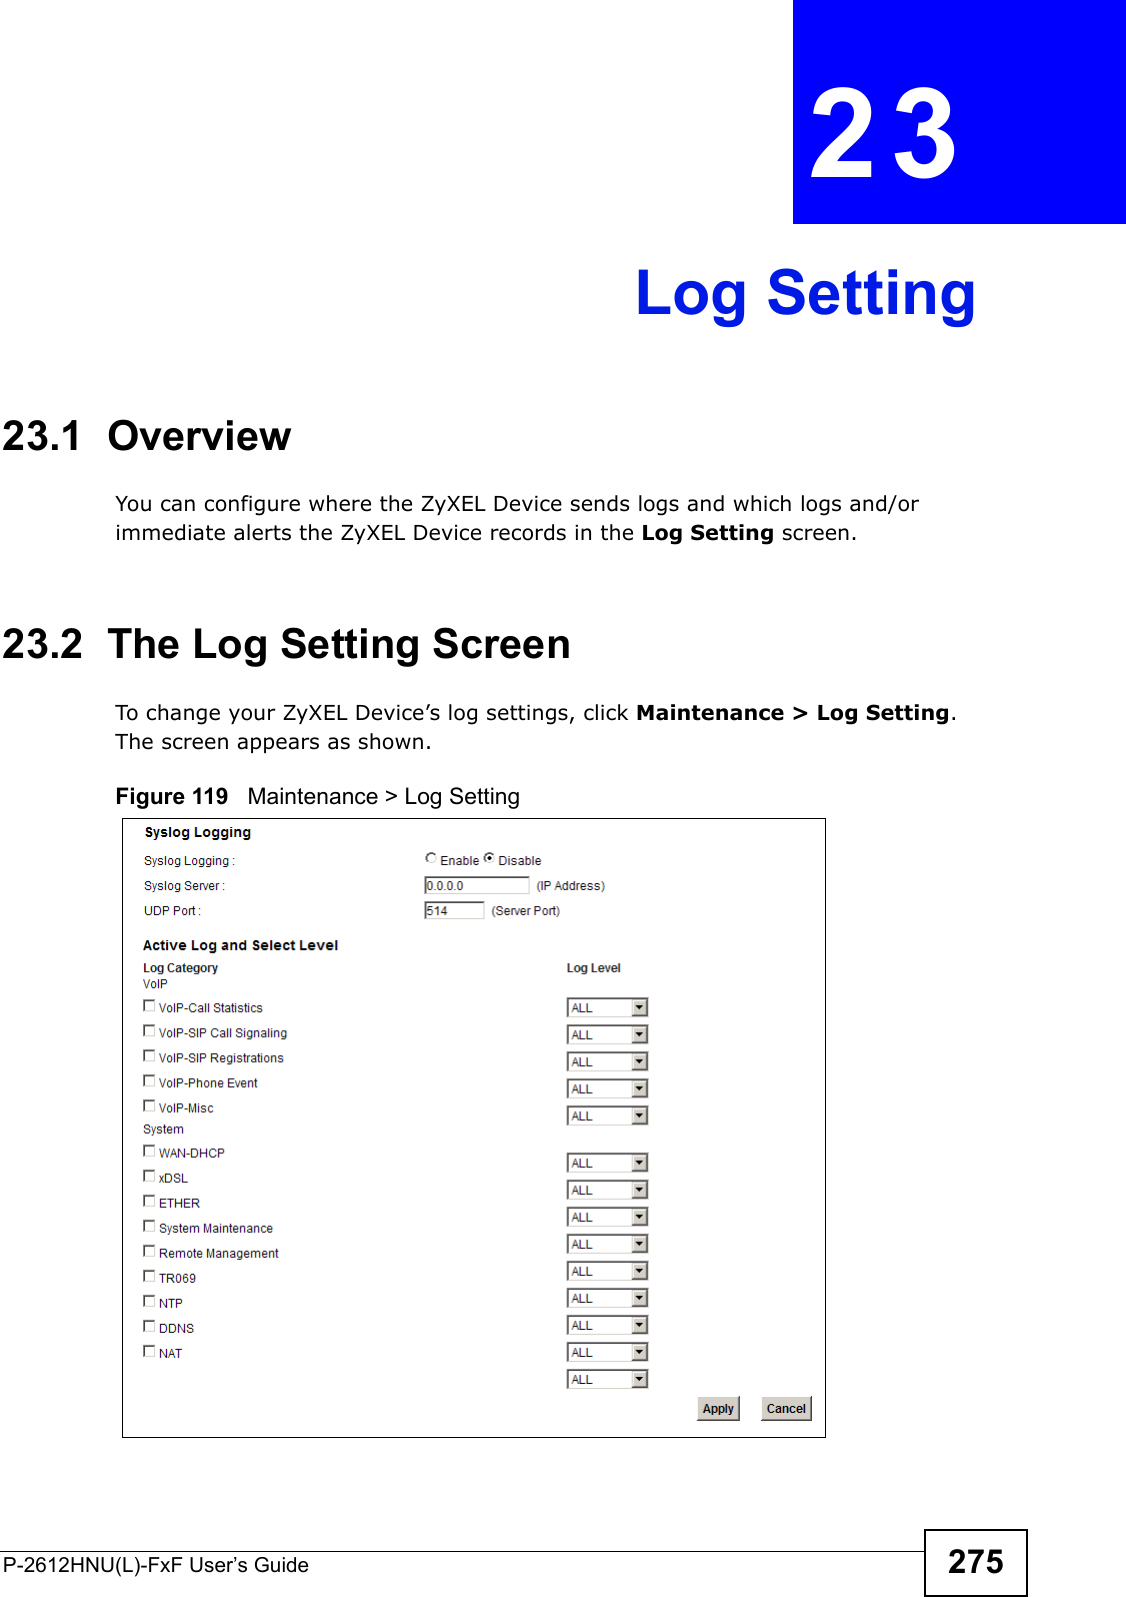 P-2612HNU(L)-FxF User’s Guide 275CHAPTER   23 Log Setting23.1  Overview You can configure where the ZyXEL Device sends logs and which logs and/or immediate alerts the ZyXEL Device records in the Log Setting screen.23.2  The Log Setting ScreenTo change your ZyXEL Device’s log settings, click Maintenance &gt; Log Setting. The screen appears as shown.Figure 119   Maintenance &gt; Log Setting